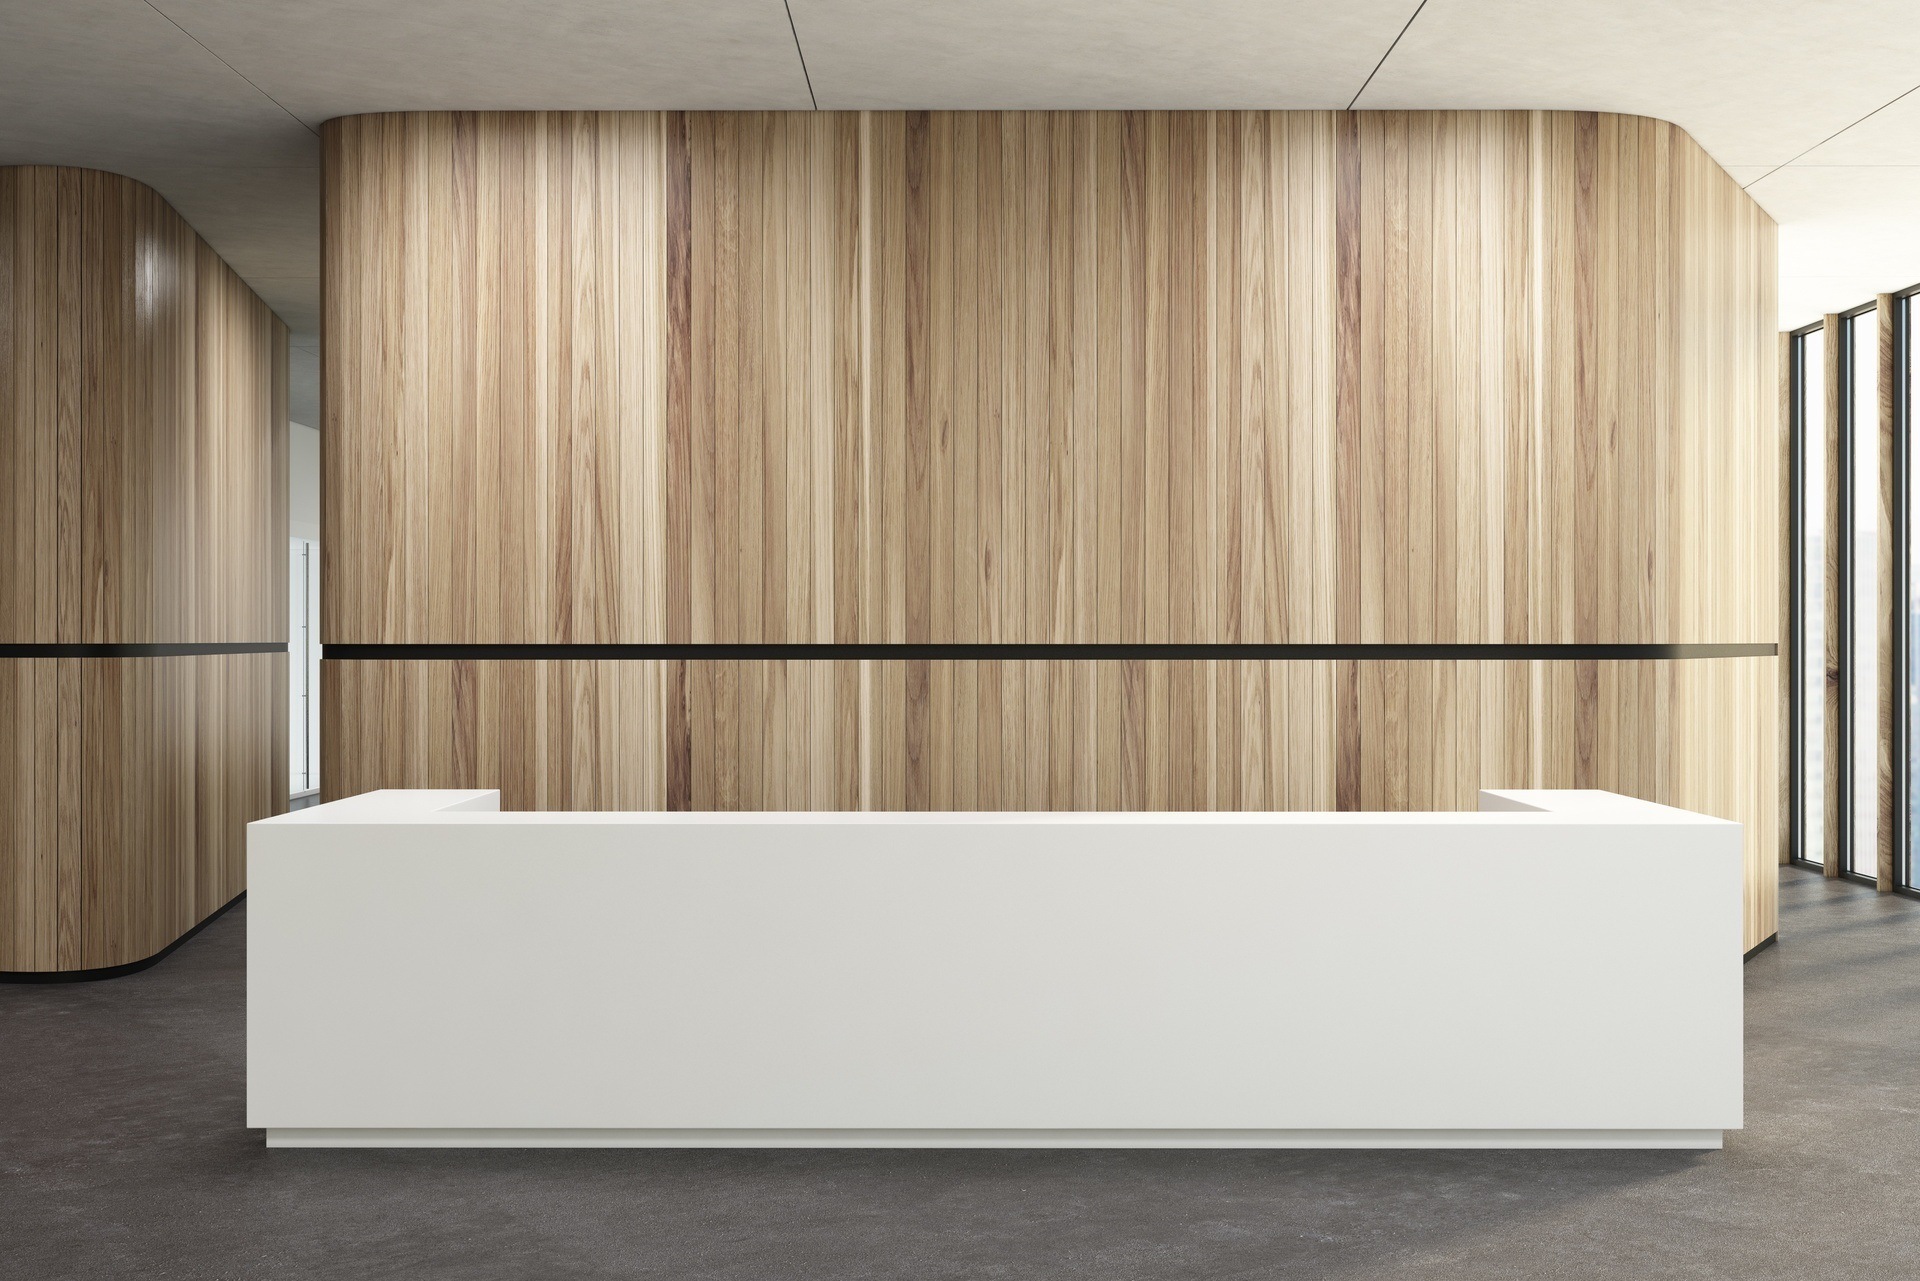 Using Flexible Veneer to Enhance a Curved Wall